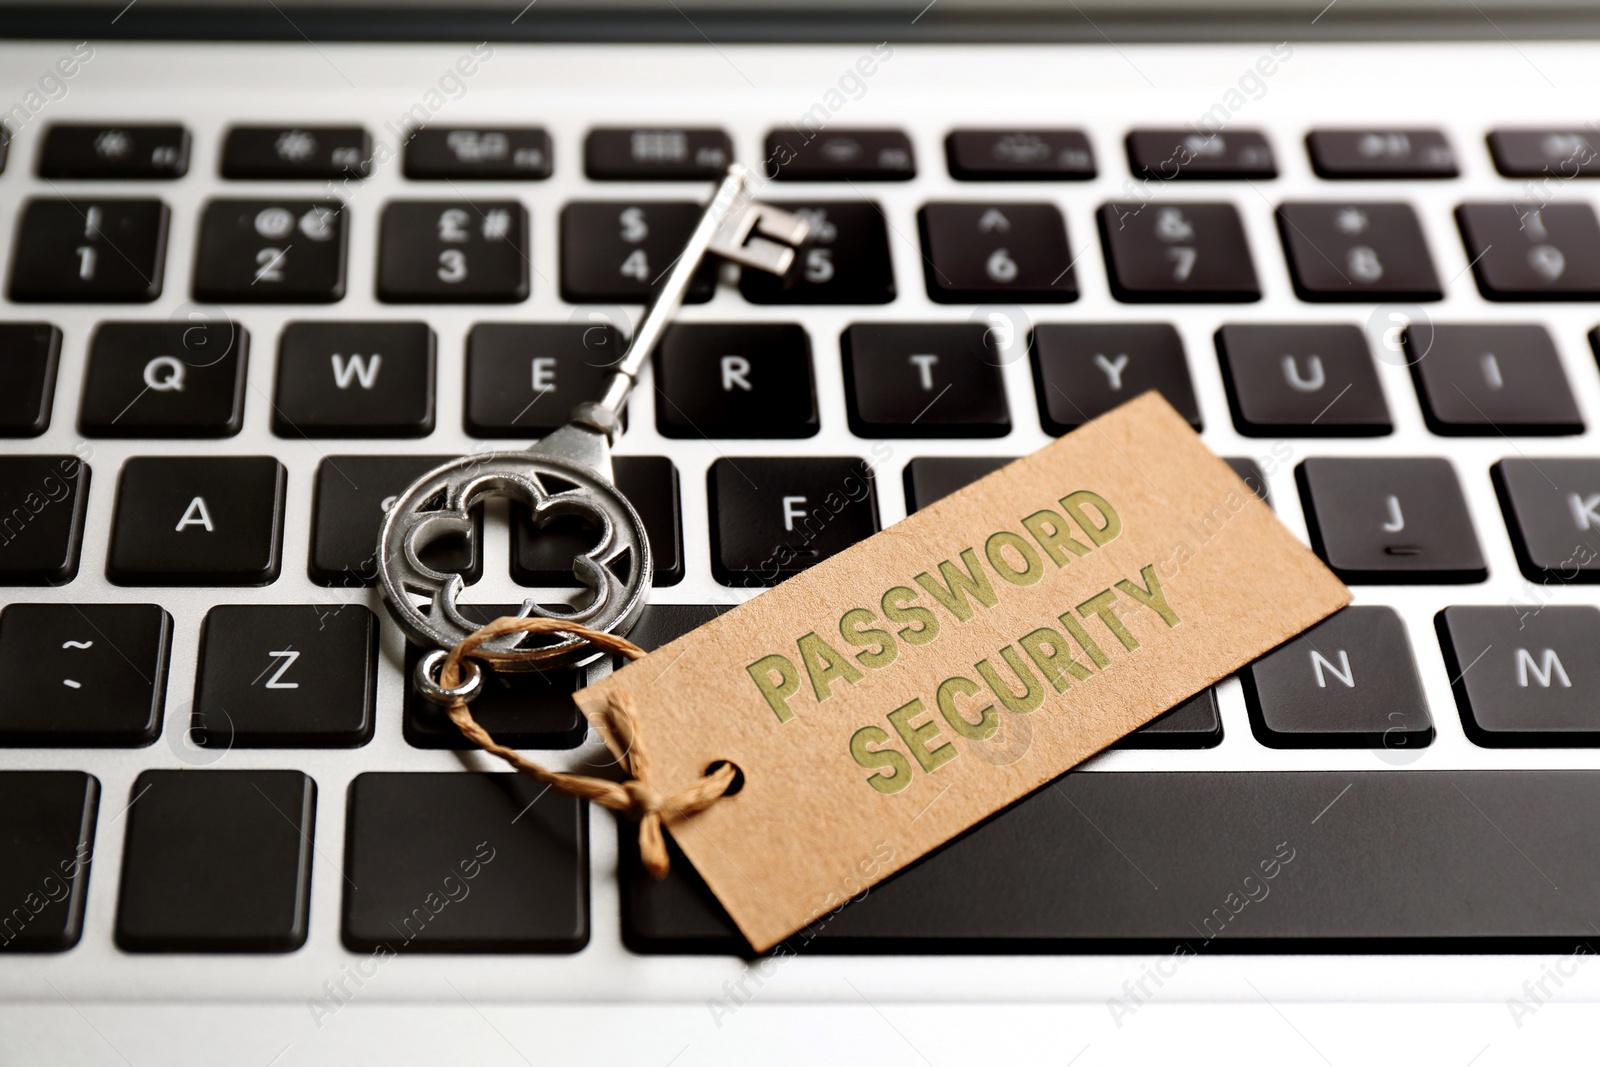 Image of Key with tag PASSWORD SECURITY on laptop keyboard, closeup